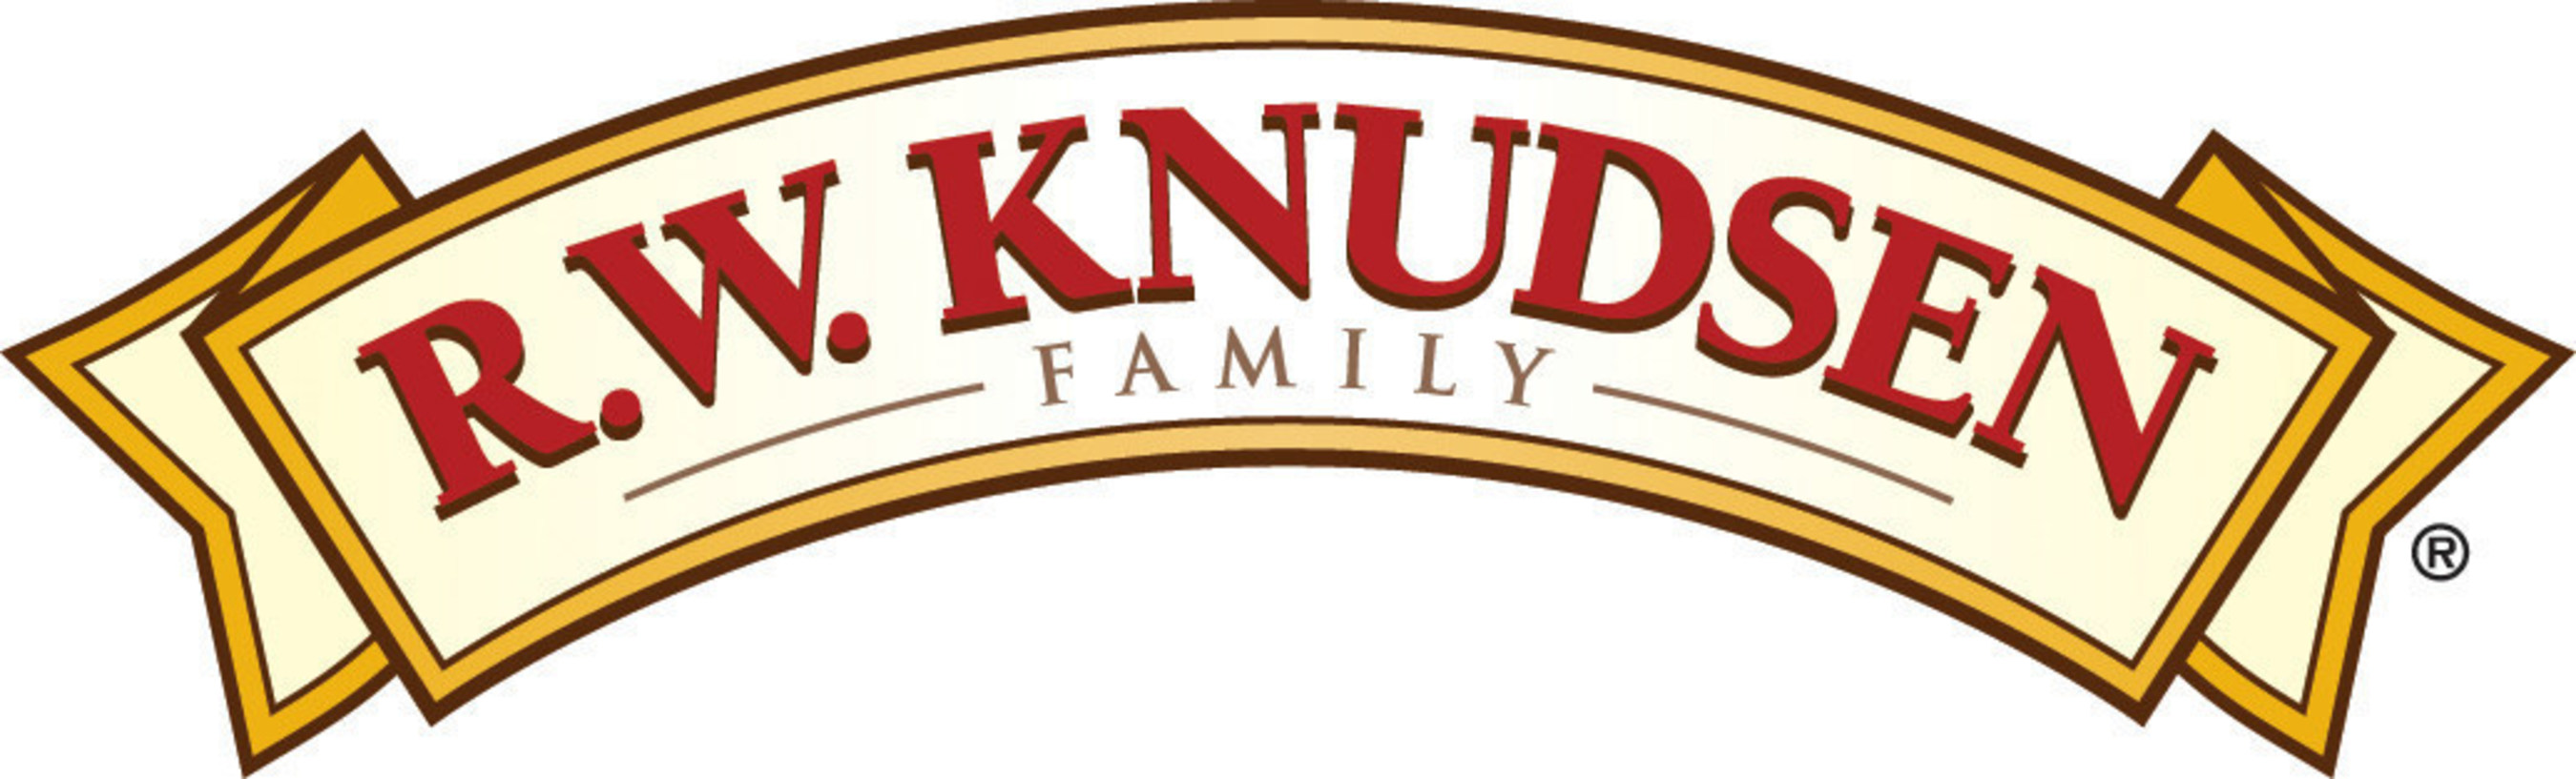 R.W. Knudsen Family(R) has produced quality, juice products since 1961. Its offerings include more than 100 types of organic fruit and vegetable juices and specialty items including Recharge(R) sports drinks. R.W. Knudsen Family products are made without artificial flavors or preservatives, and are exclusively fruit juice sweetened. Visit www.rwknudsenfamily.com for more information.